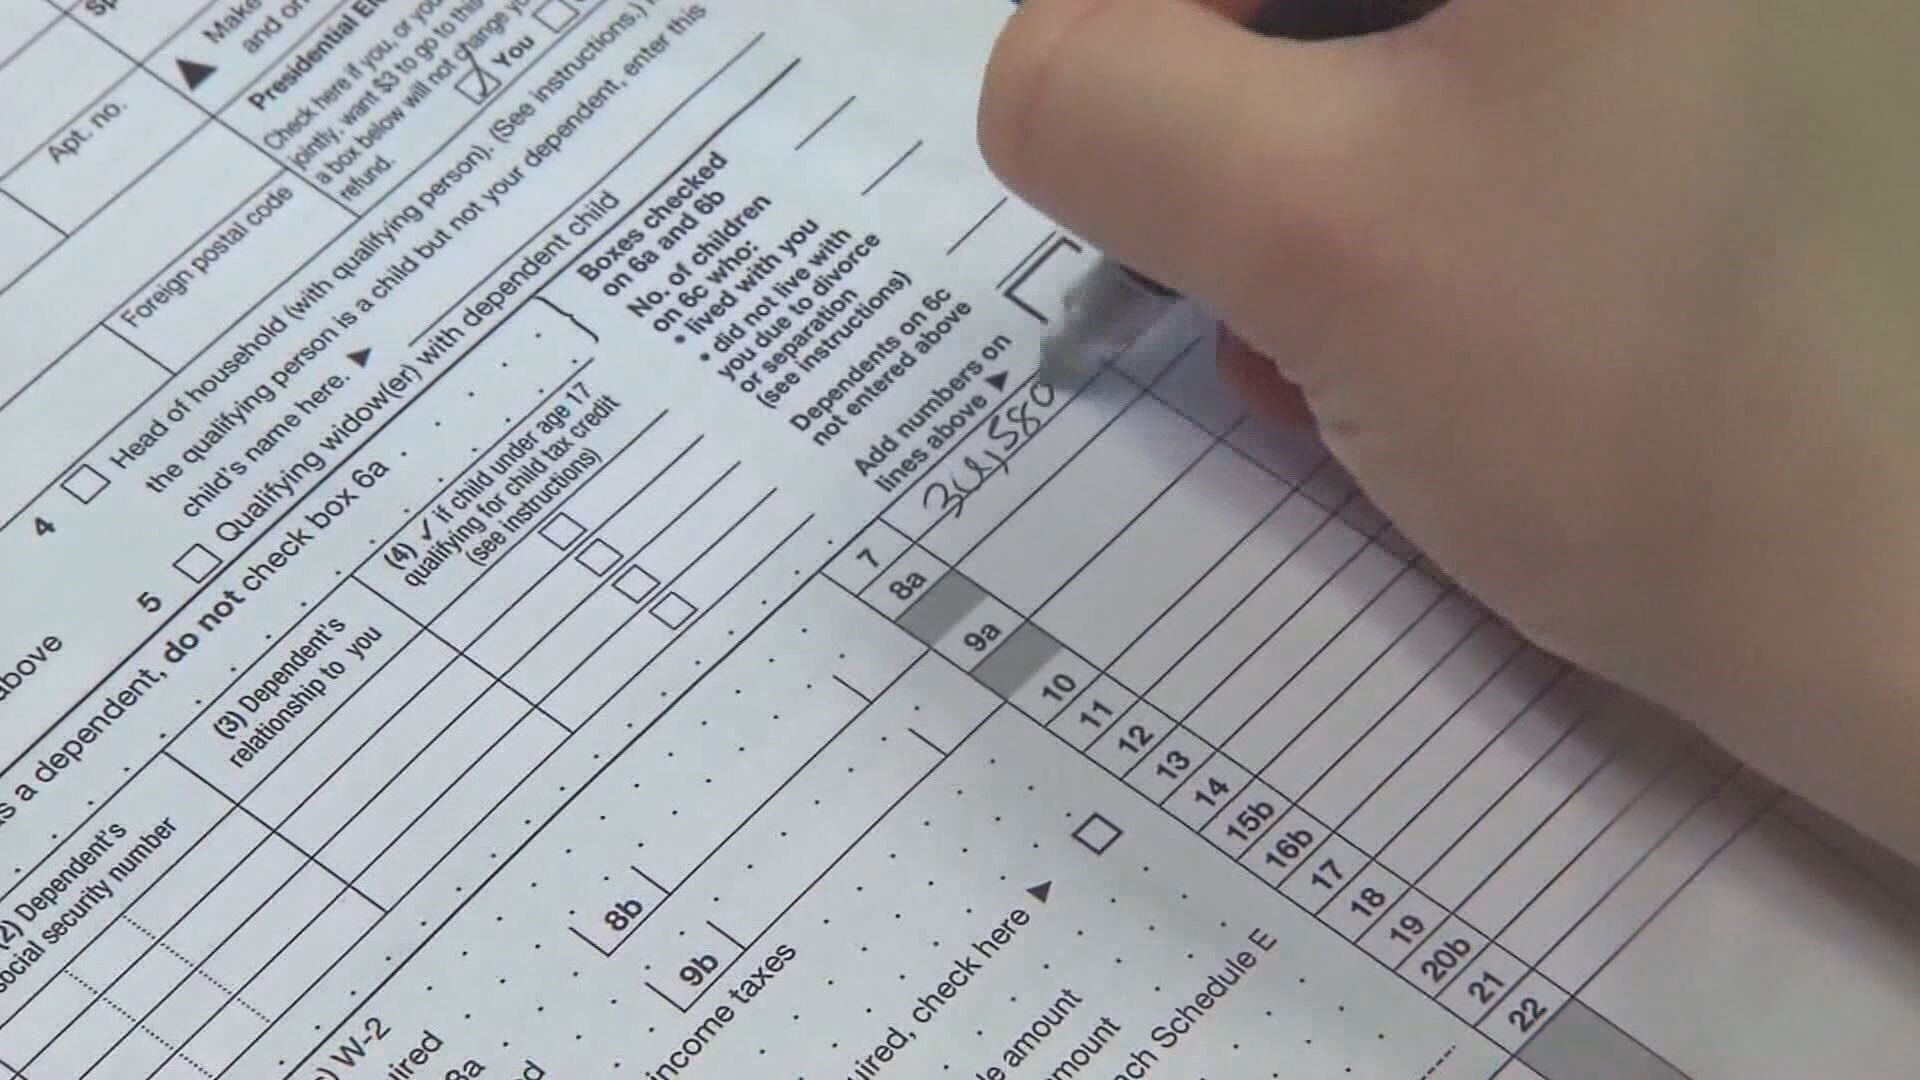 The deadline to file federal taxes is April 18.